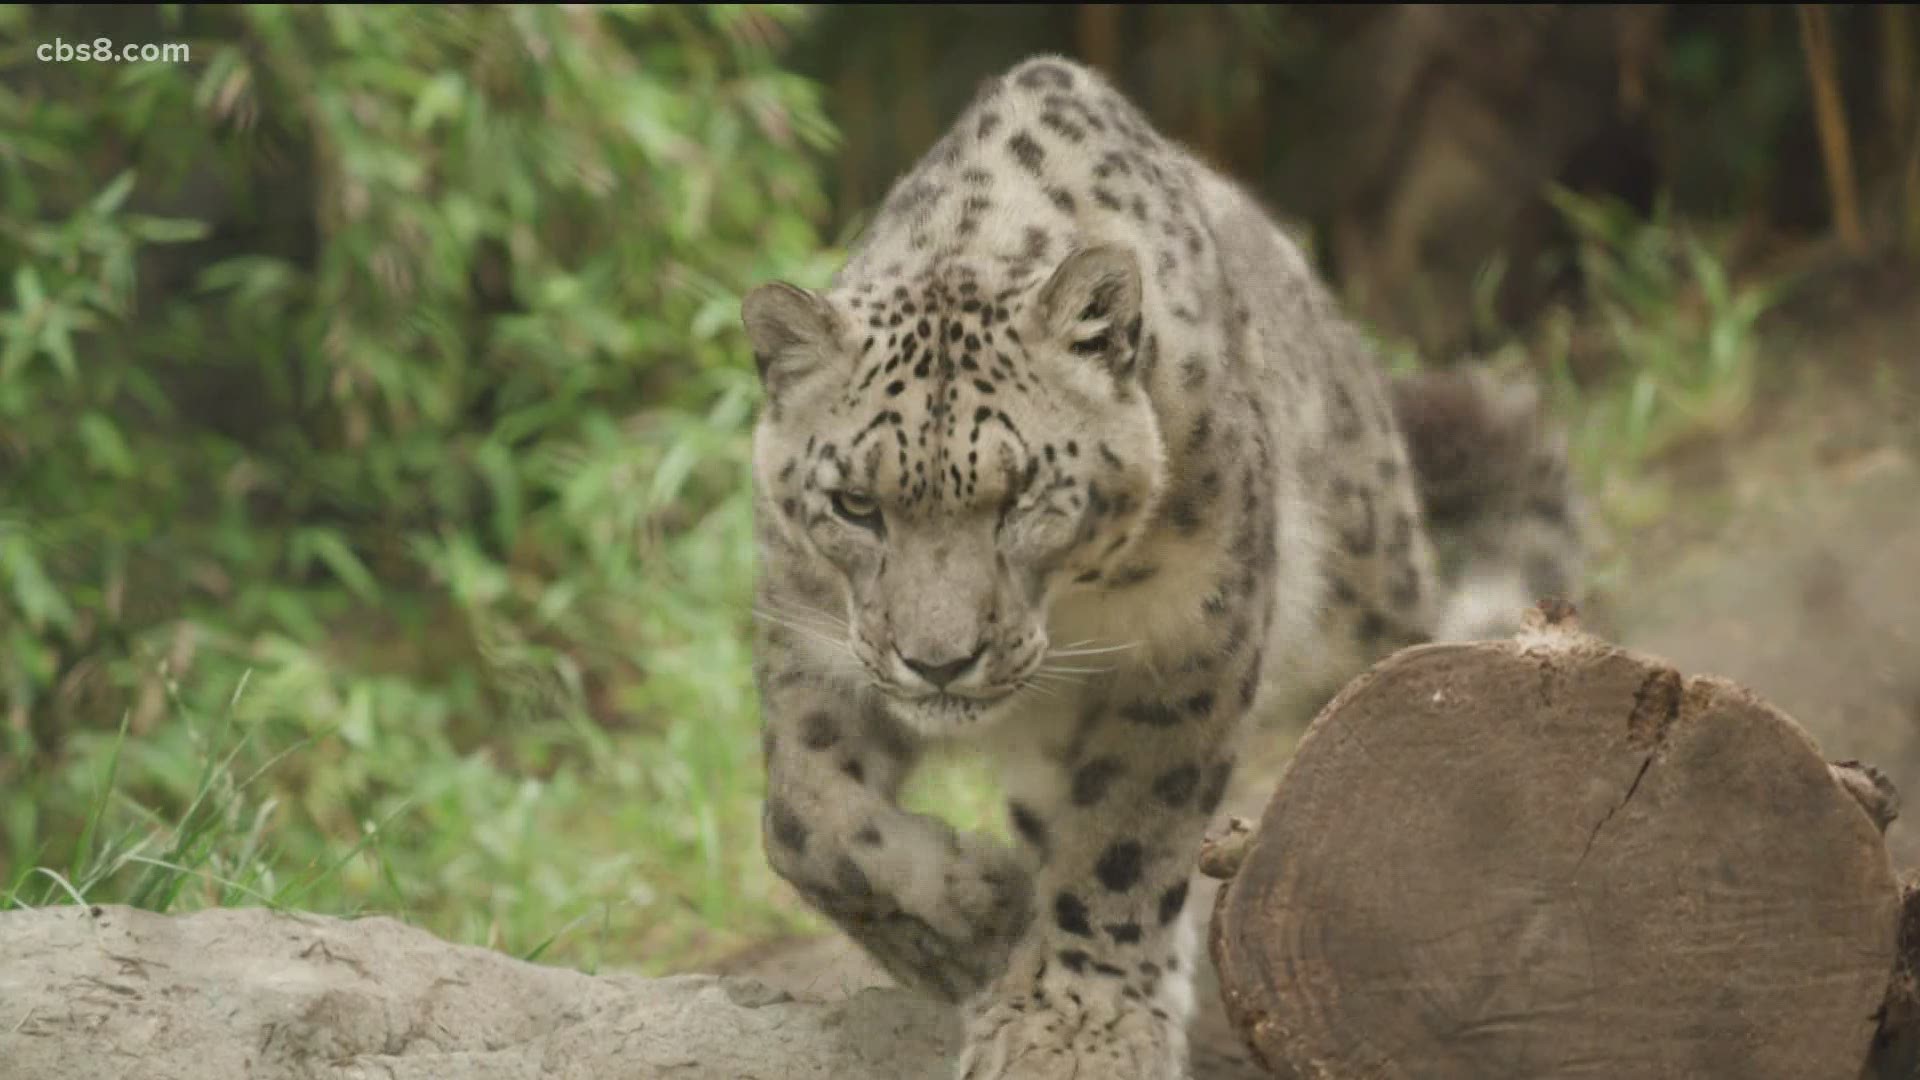 A male snow leopard at the San Diego Zoo has preliminarily tested positive for SARS-CoV-2, the virus that causes COVID-19, it was announced Friday.